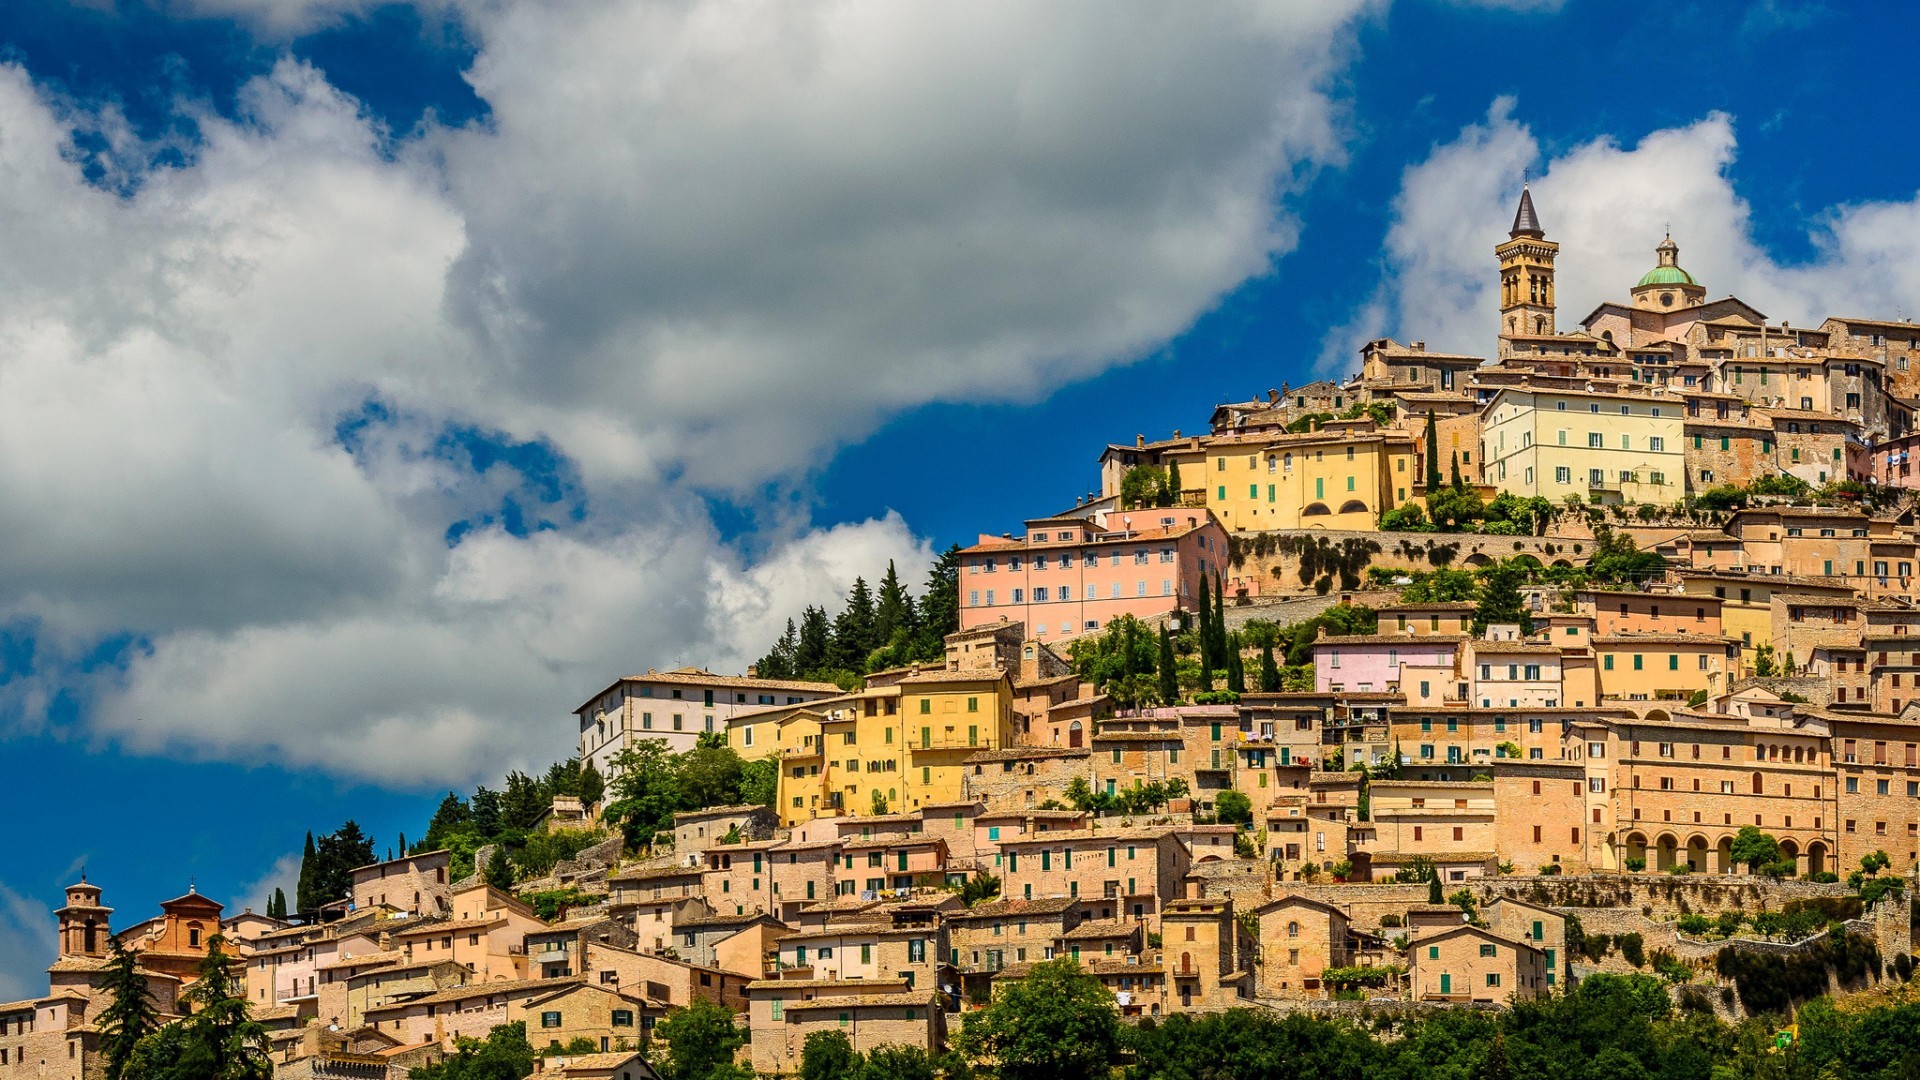 General 1920x1080 Italy town clouds